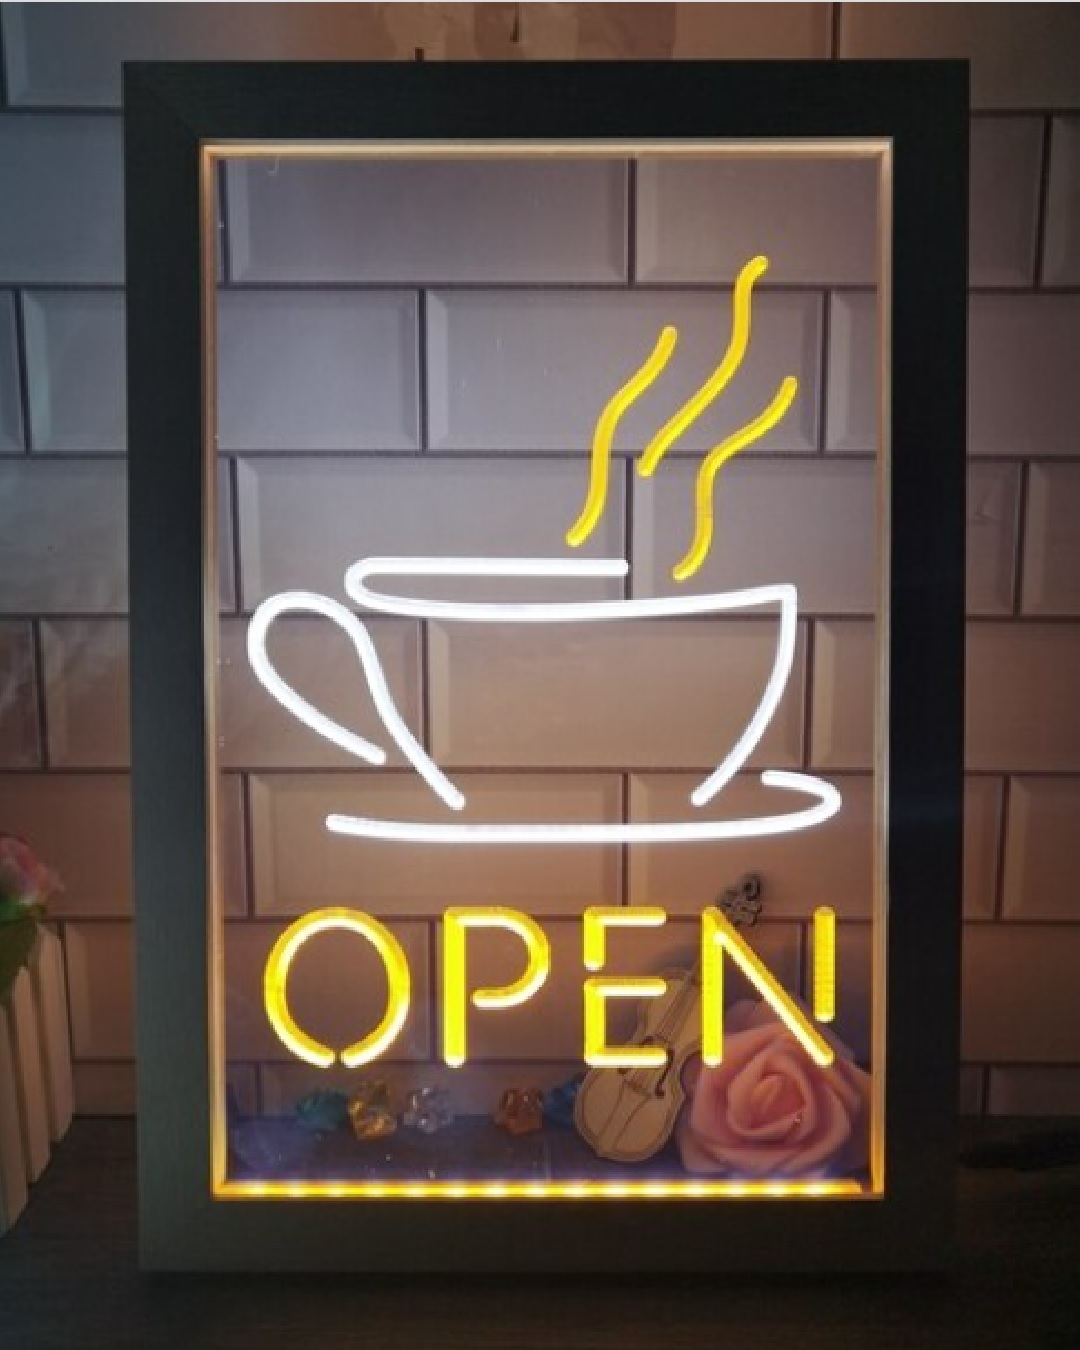 Open sign in white and yellow